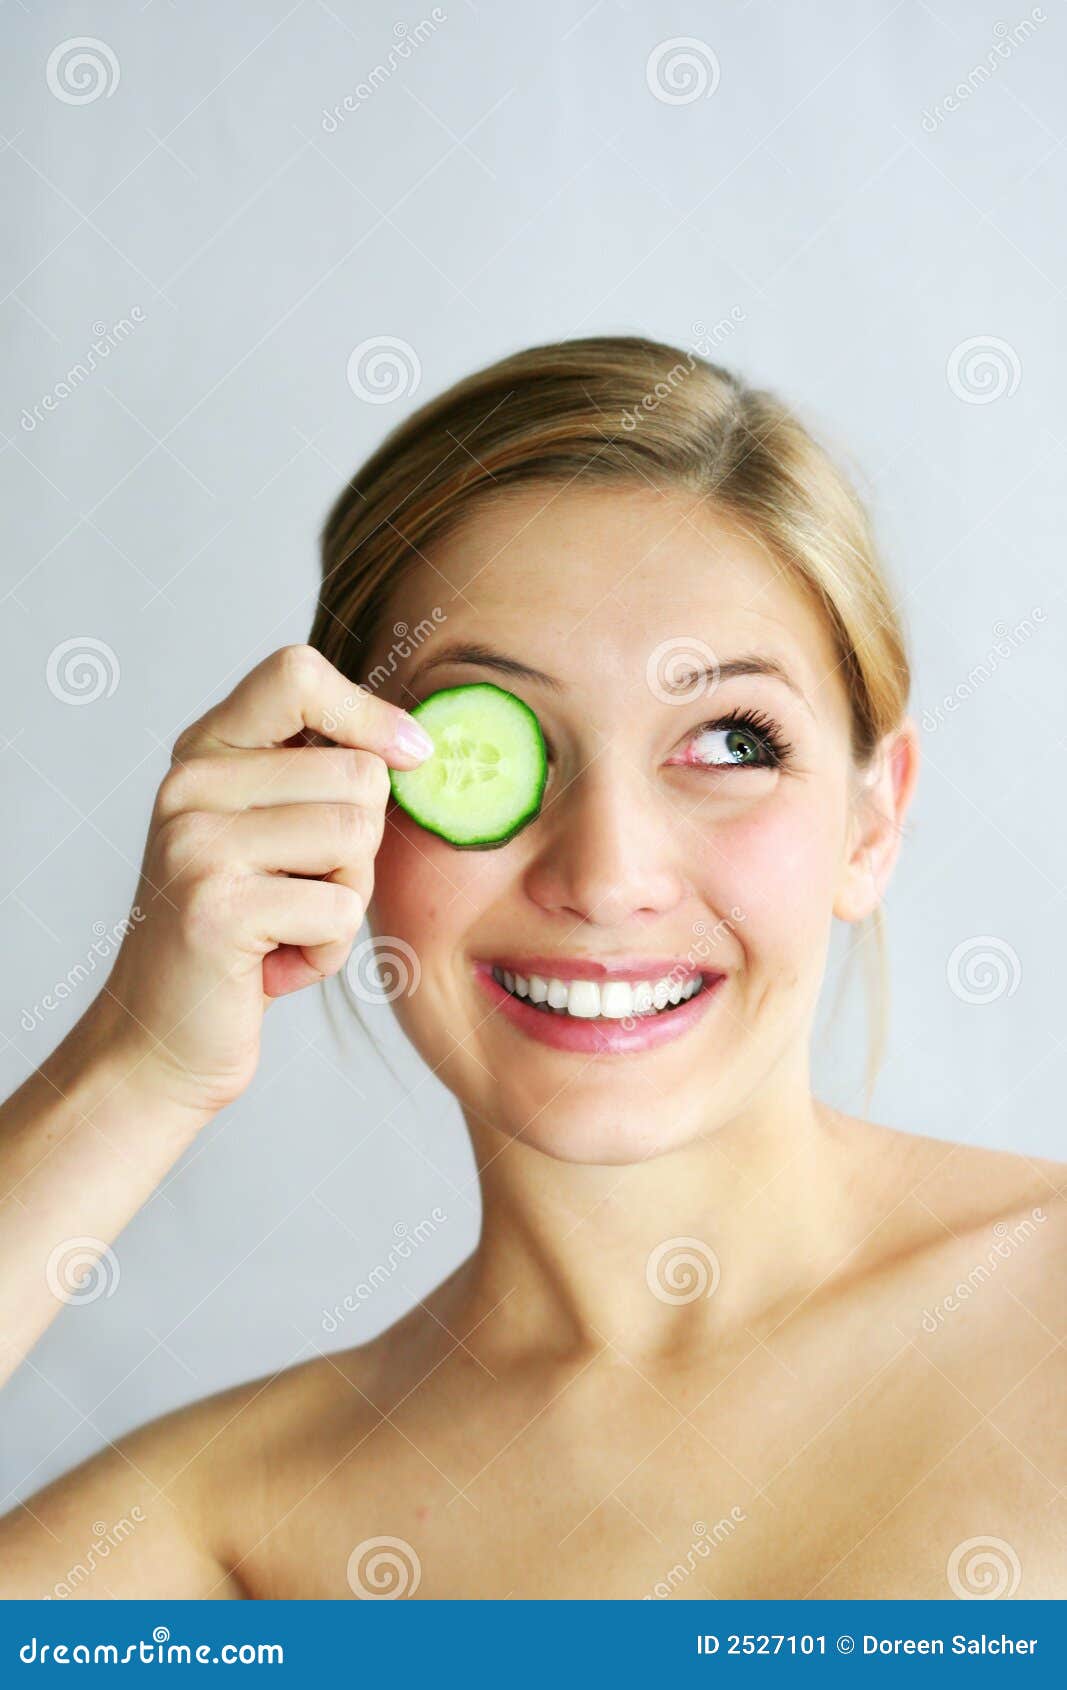 Cucumber face mask stock image. Image of harmony, healthcare - 2527101